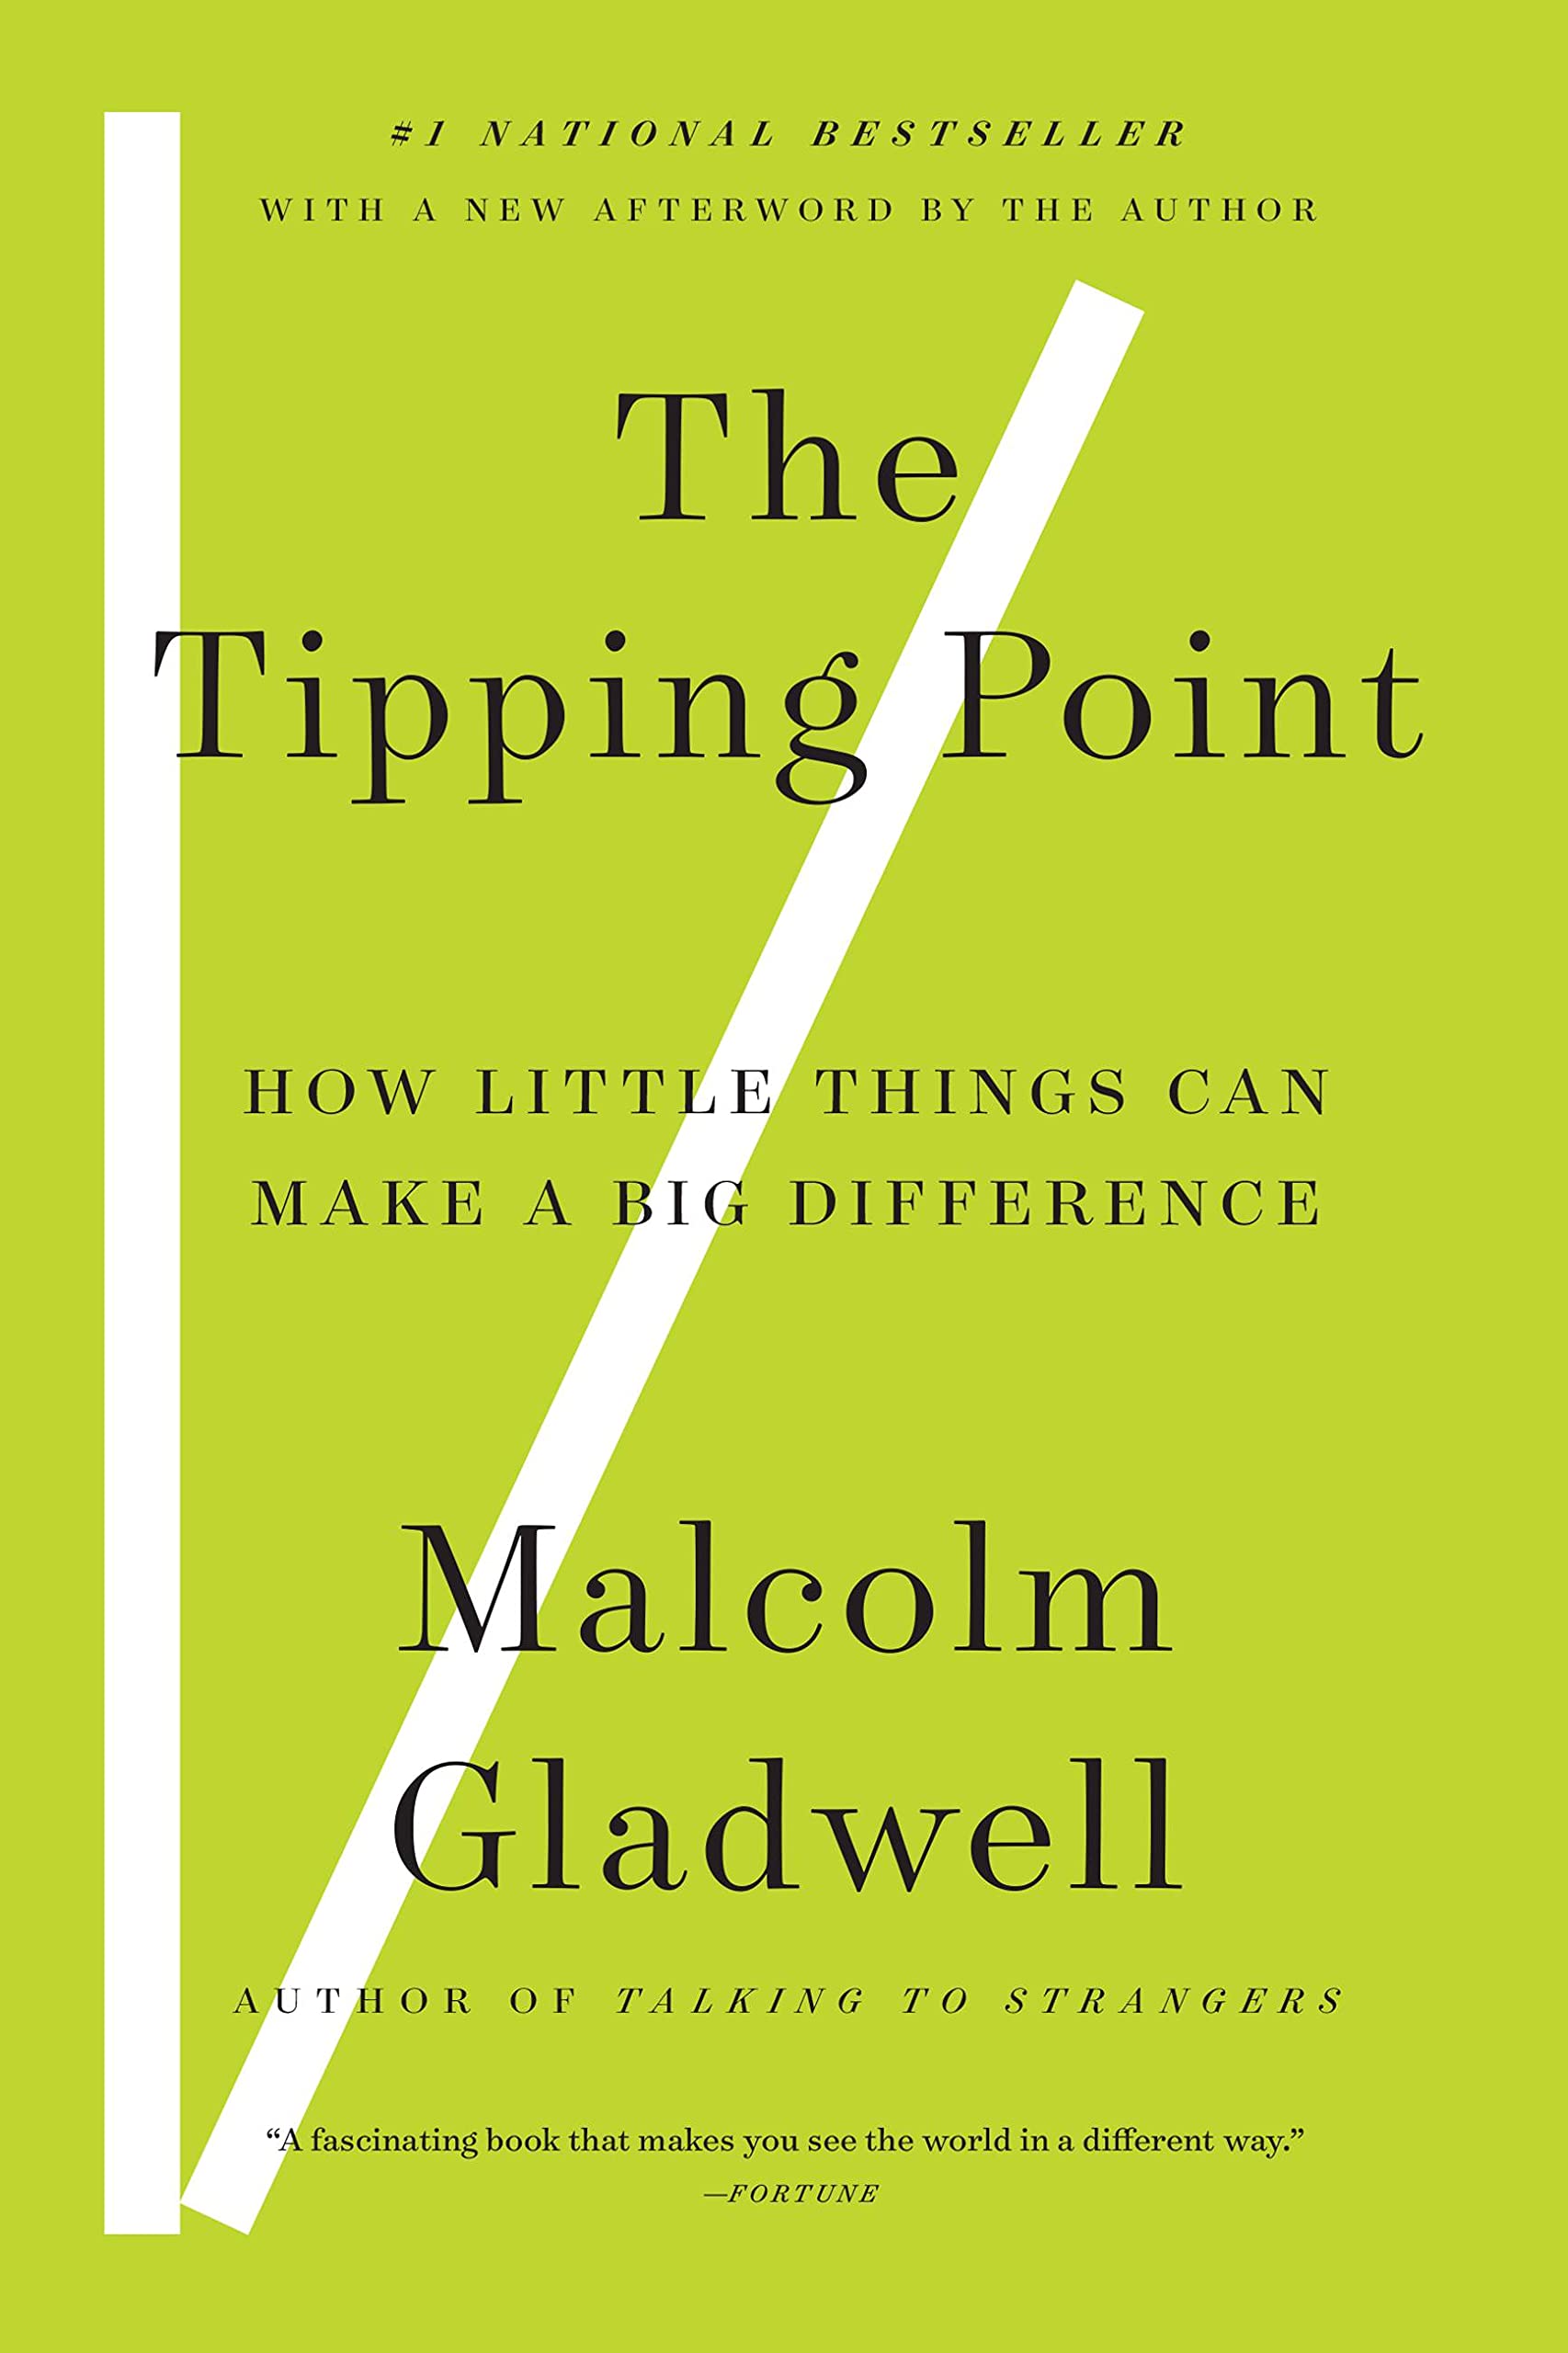 The book cover for The Tipping Point.